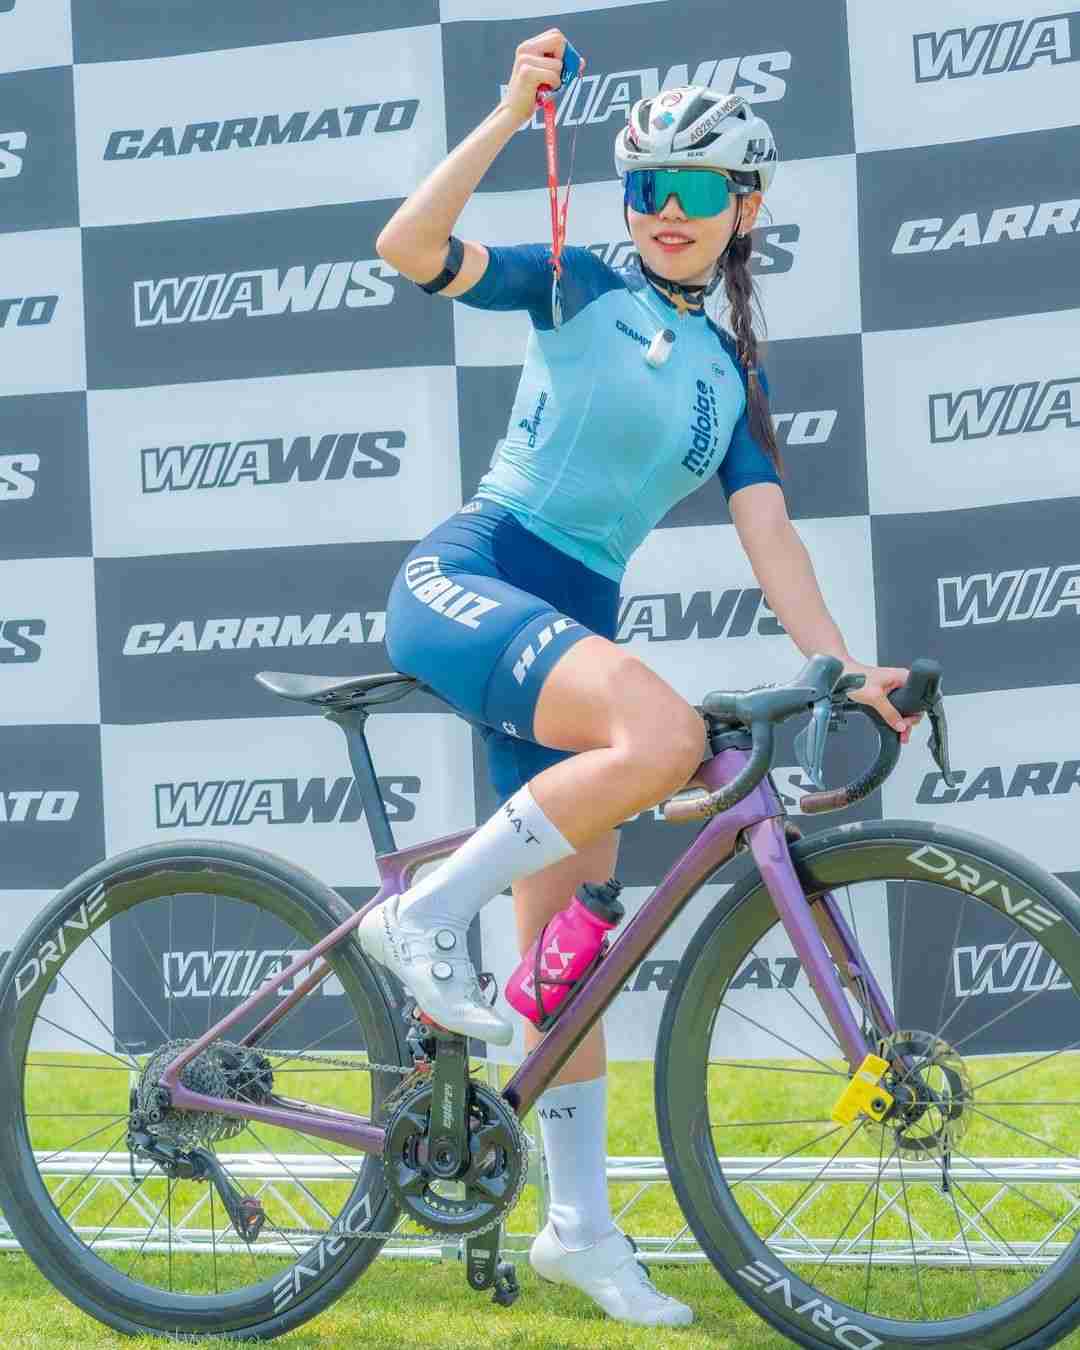 A Korean Female Cyclist Celebrates Victory at the Finish Line of A WIAWIS Sponsored Event